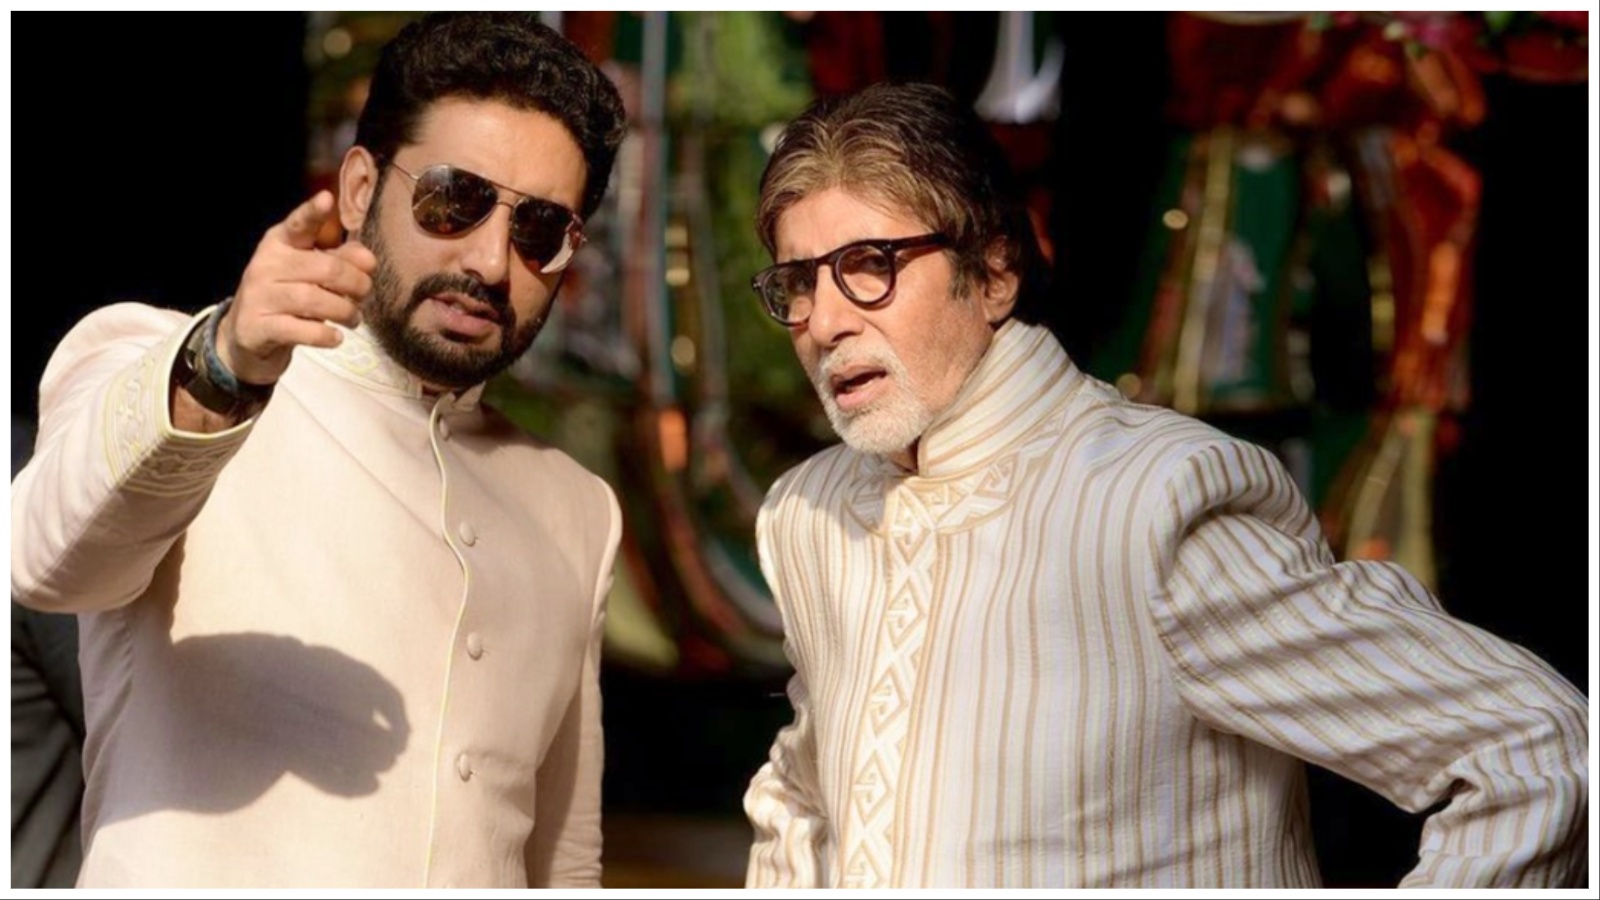 Abhishek Bachchan couldn't afford clothes when family was 'going through a  rough time', says he reused sherwani from sister's wedding at awards event  | Bollywood News - The Indian Express